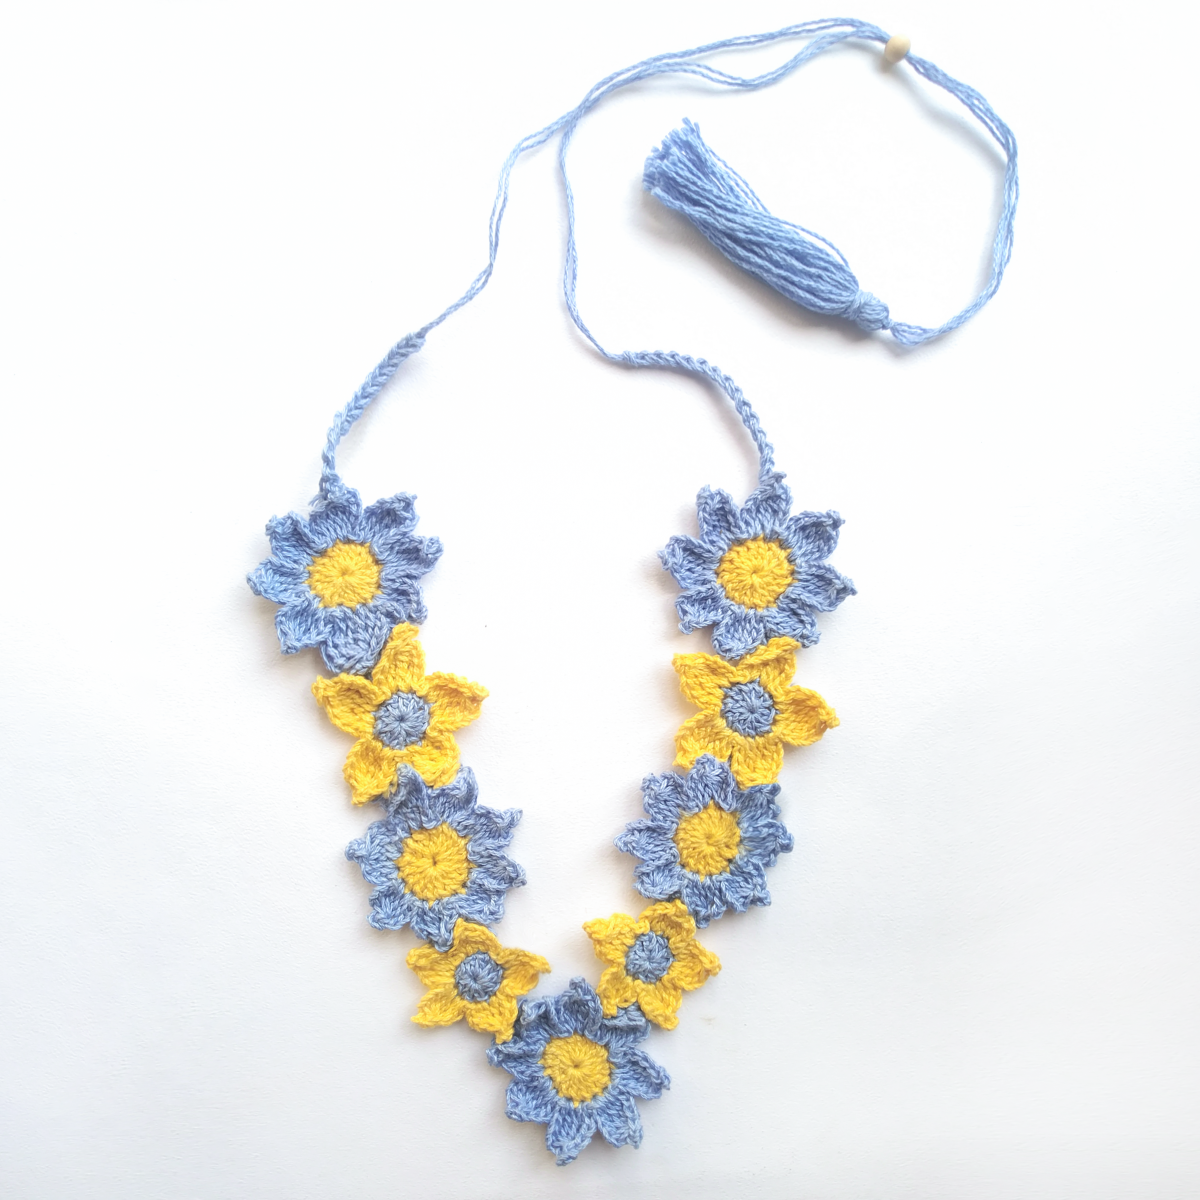 Star Handcrafted Crochet Necklace